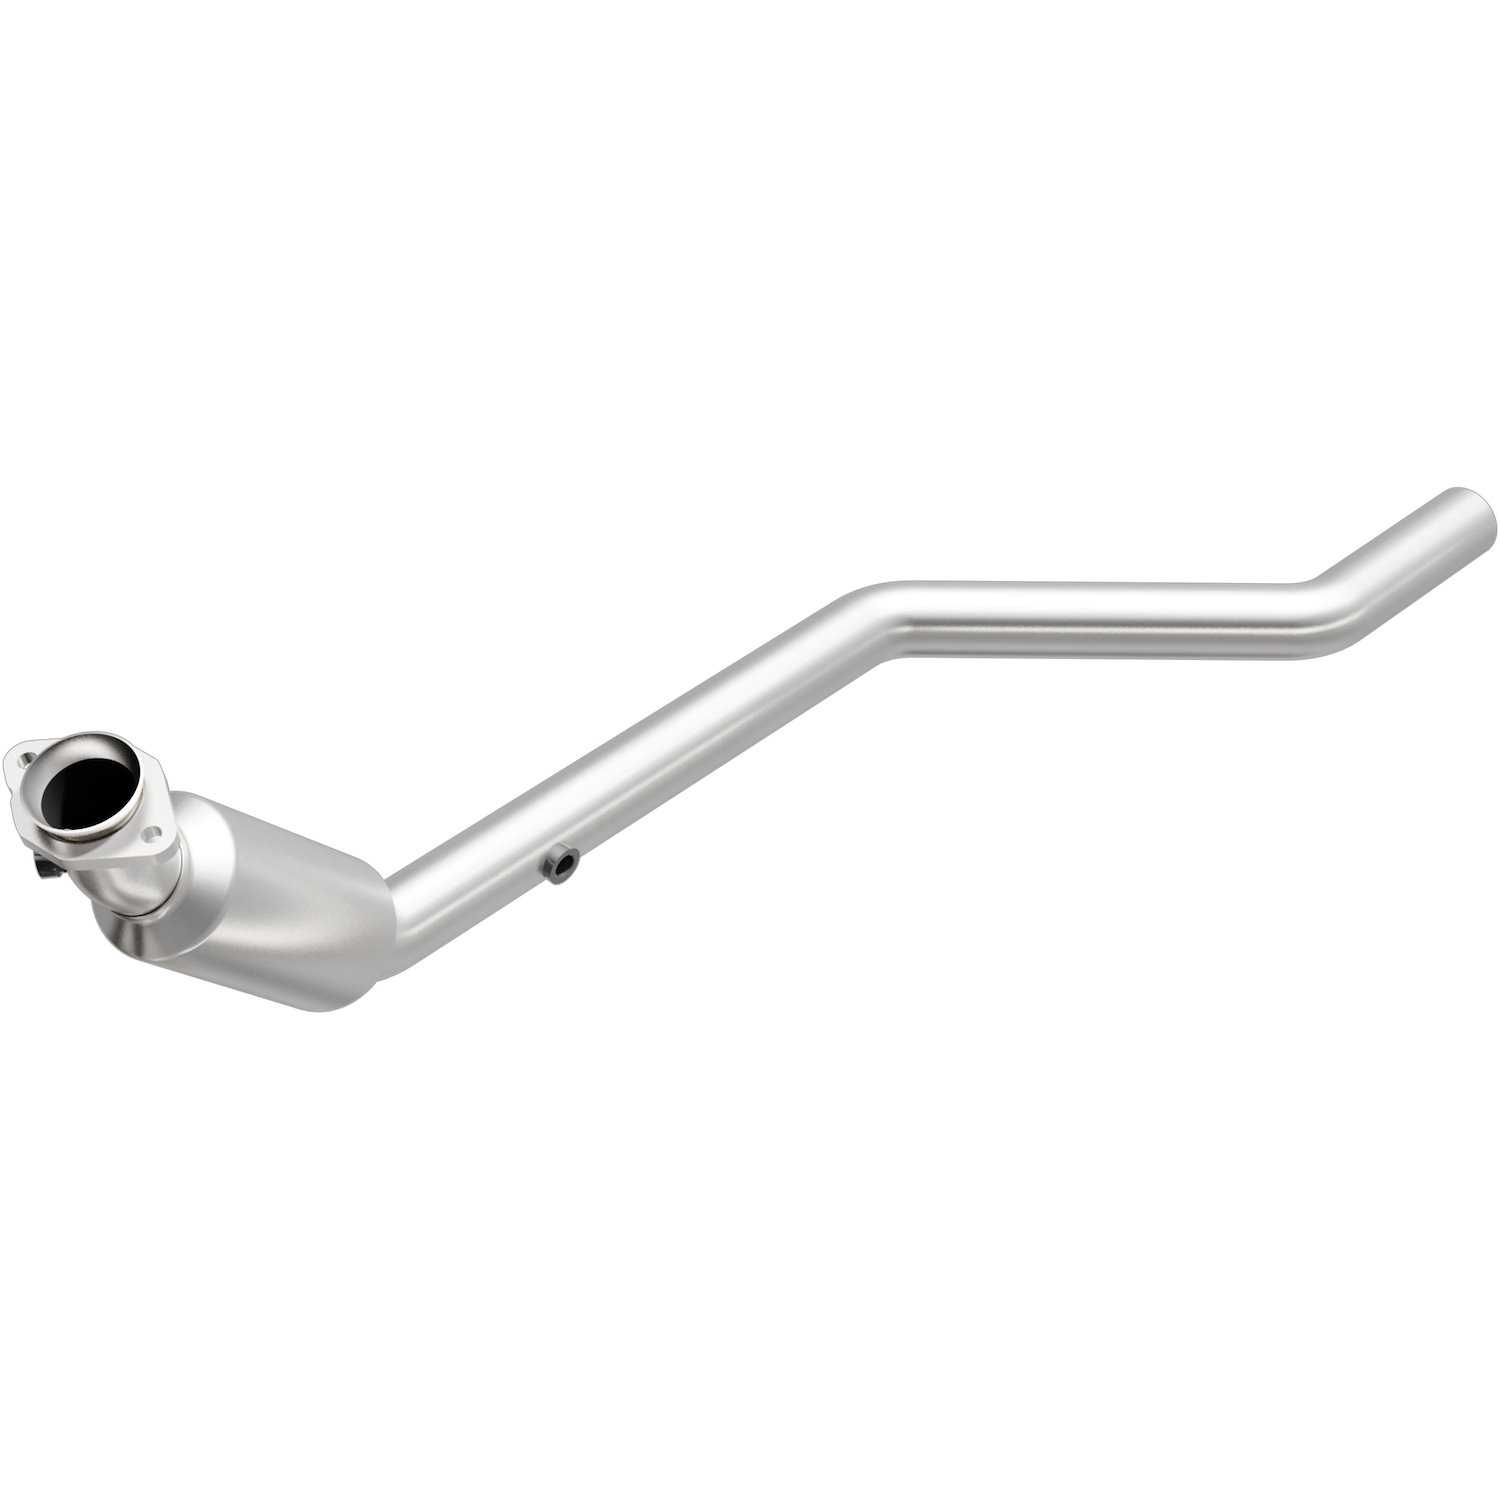 OEM Grade Federal / EPA Compliant Direct-Fit Catalytic Converter 49179